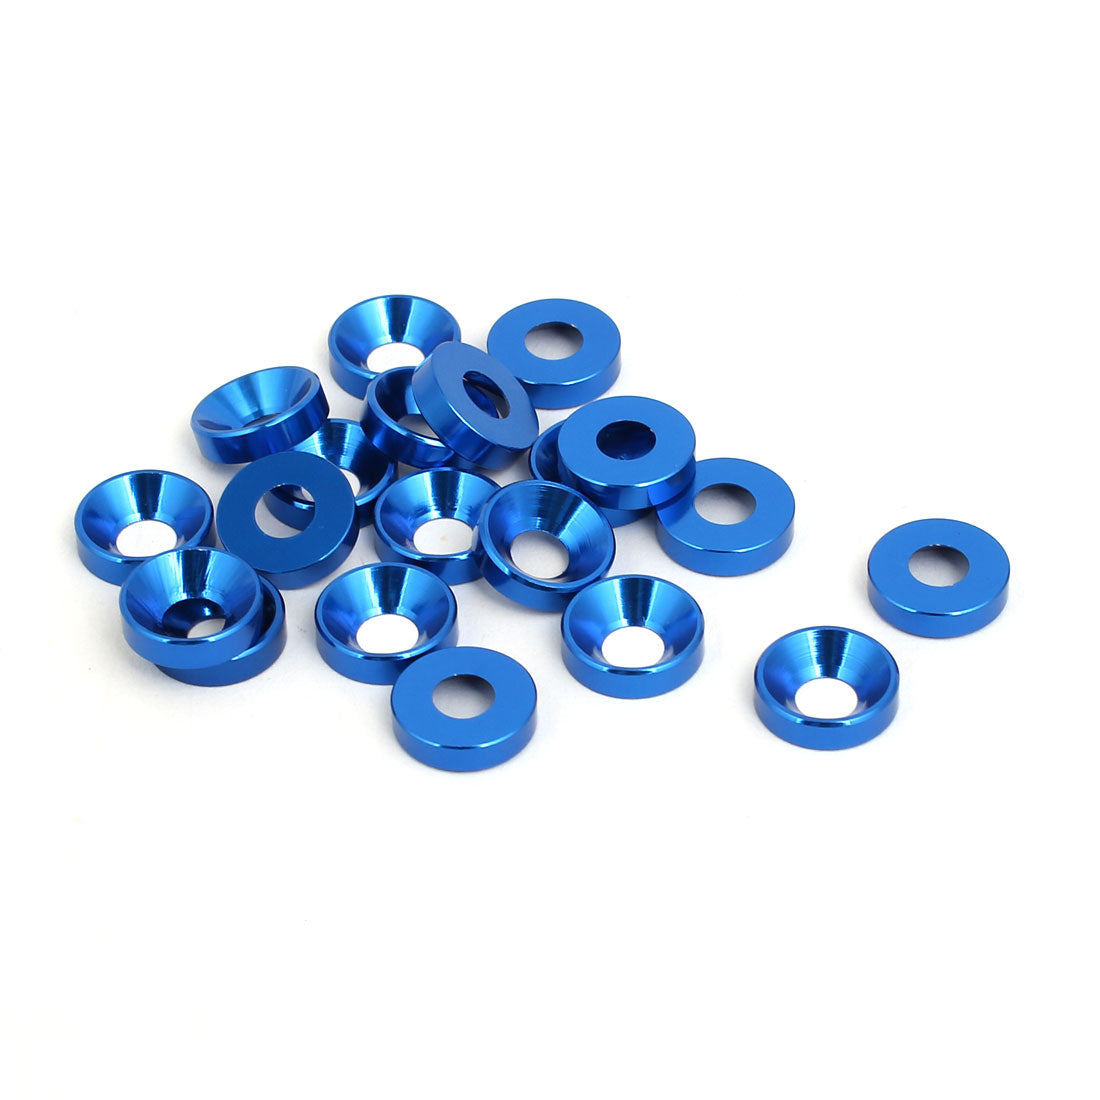 Uxcell Uxcell M4 Aluminium Alloy Cup Head Engine Bay Fender Bumper Washer Royal Blue 20pcs